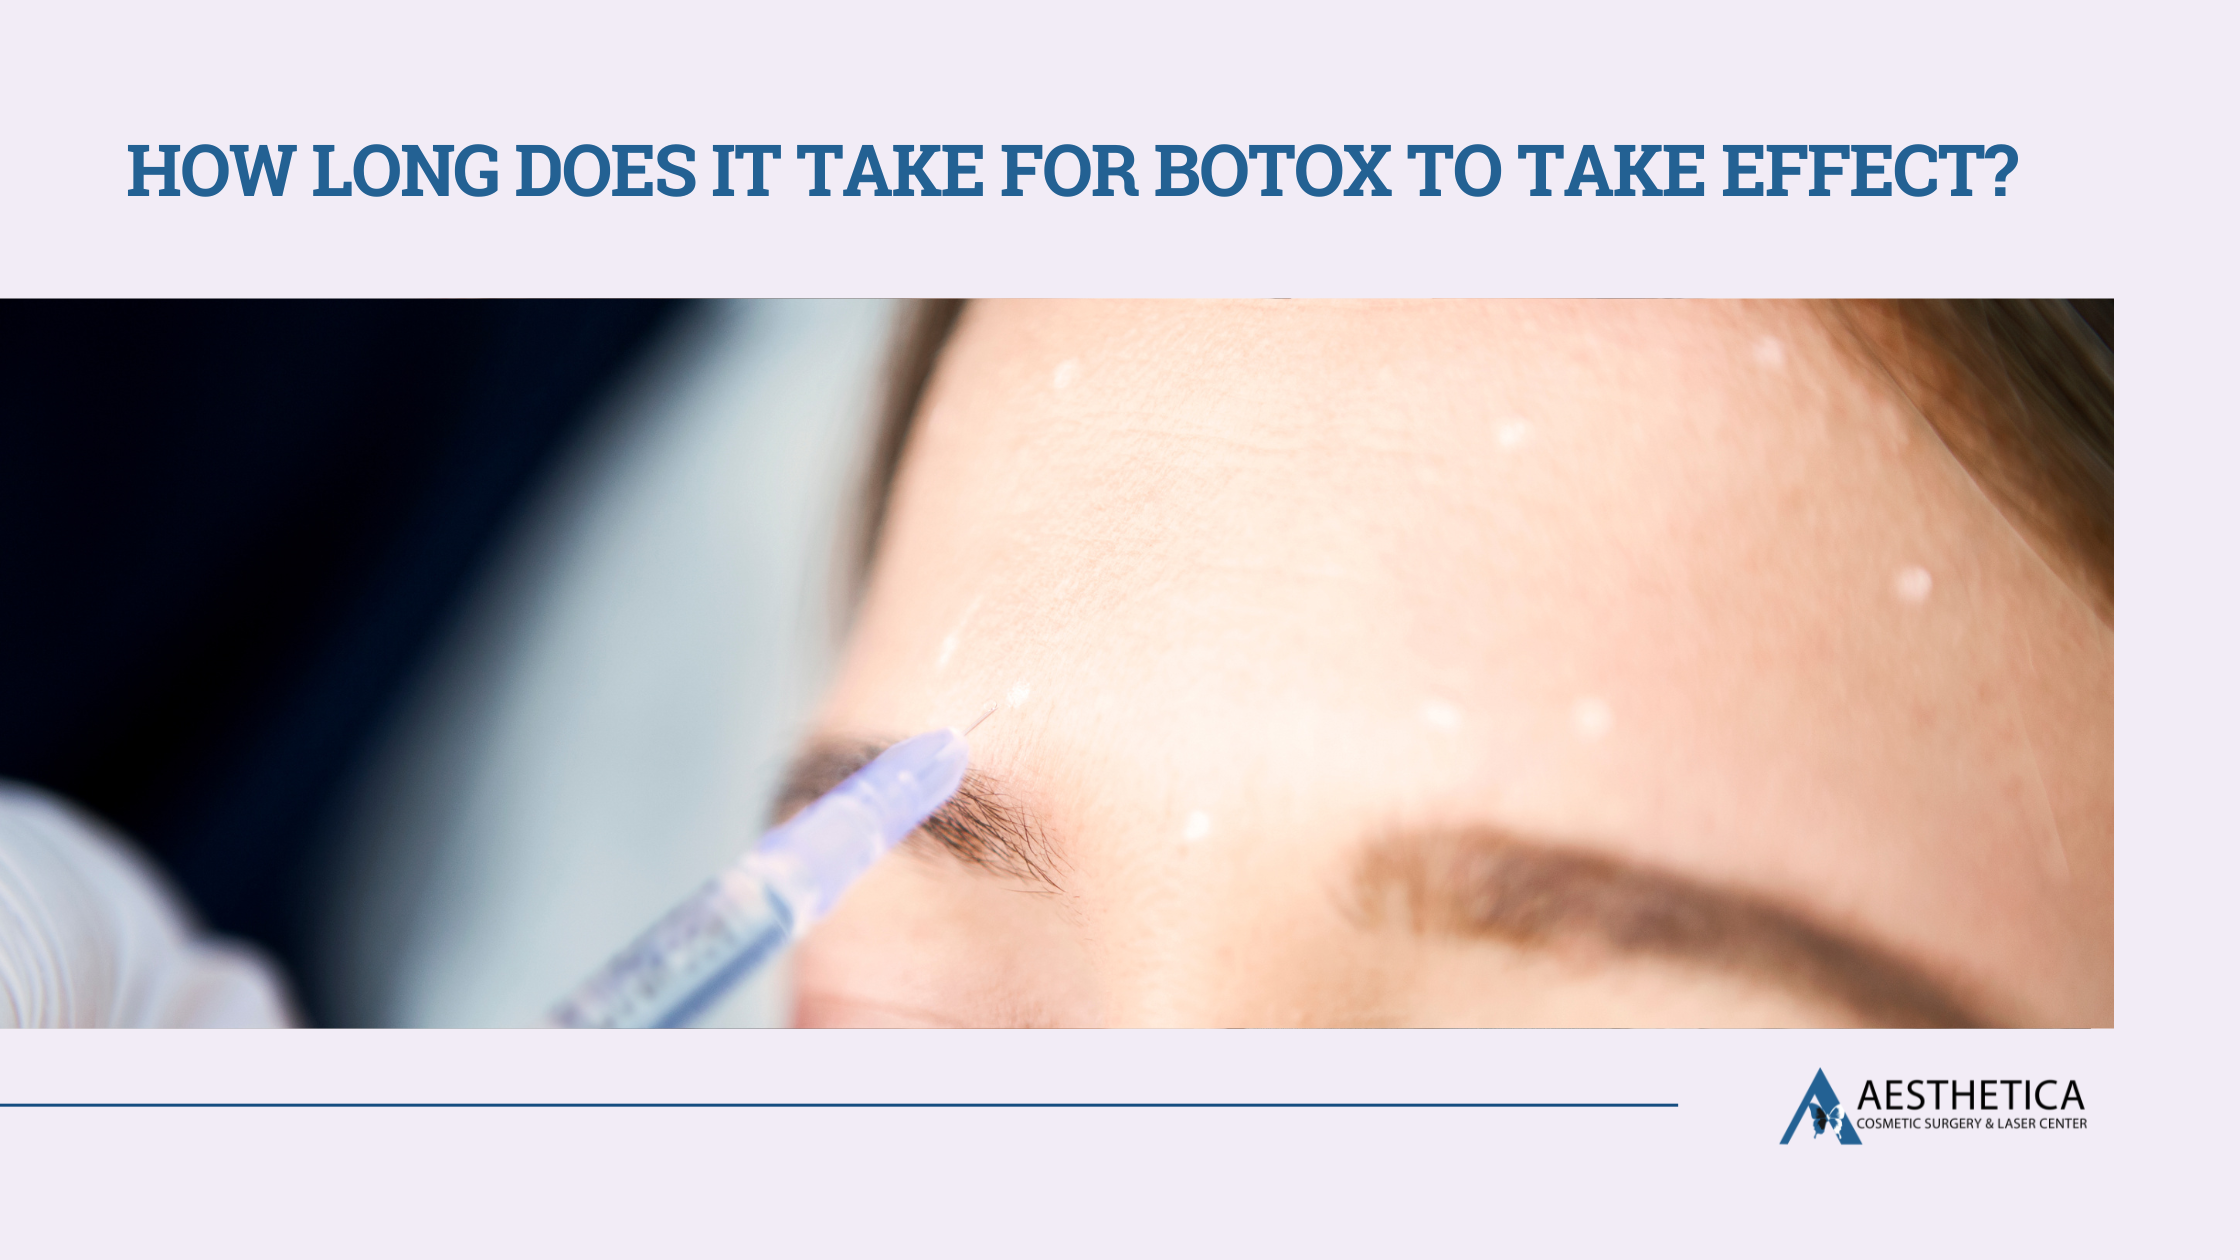 How Long Does It Take for BOTOX to Take Effect?